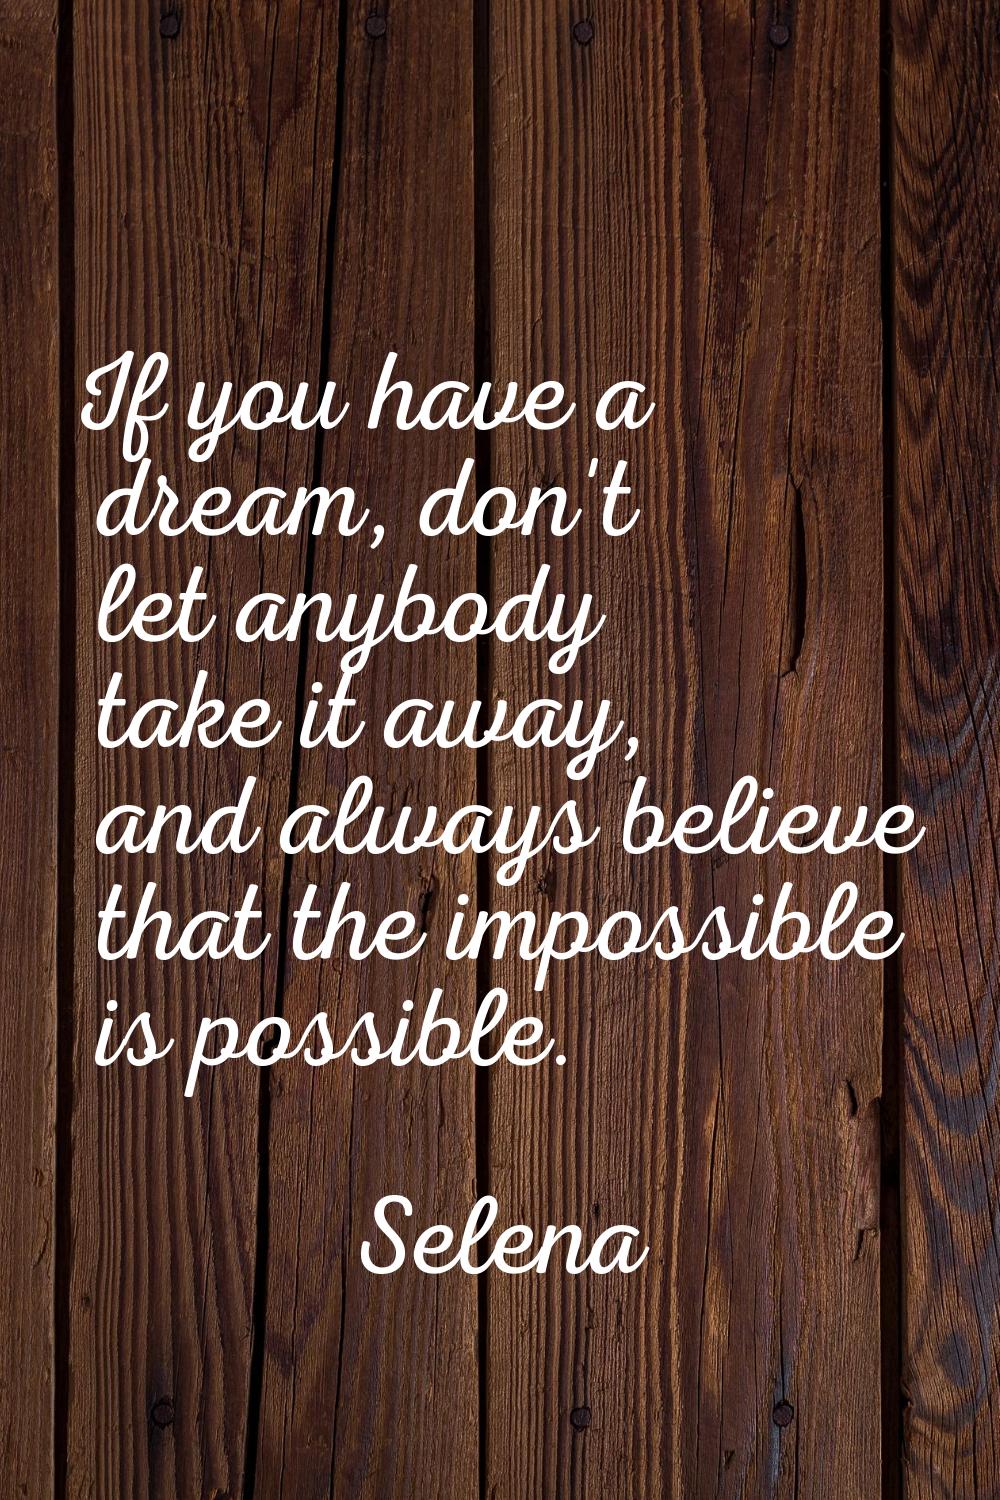 If you have a dream, don't let anybody take it away, and always believe that the impossible is poss